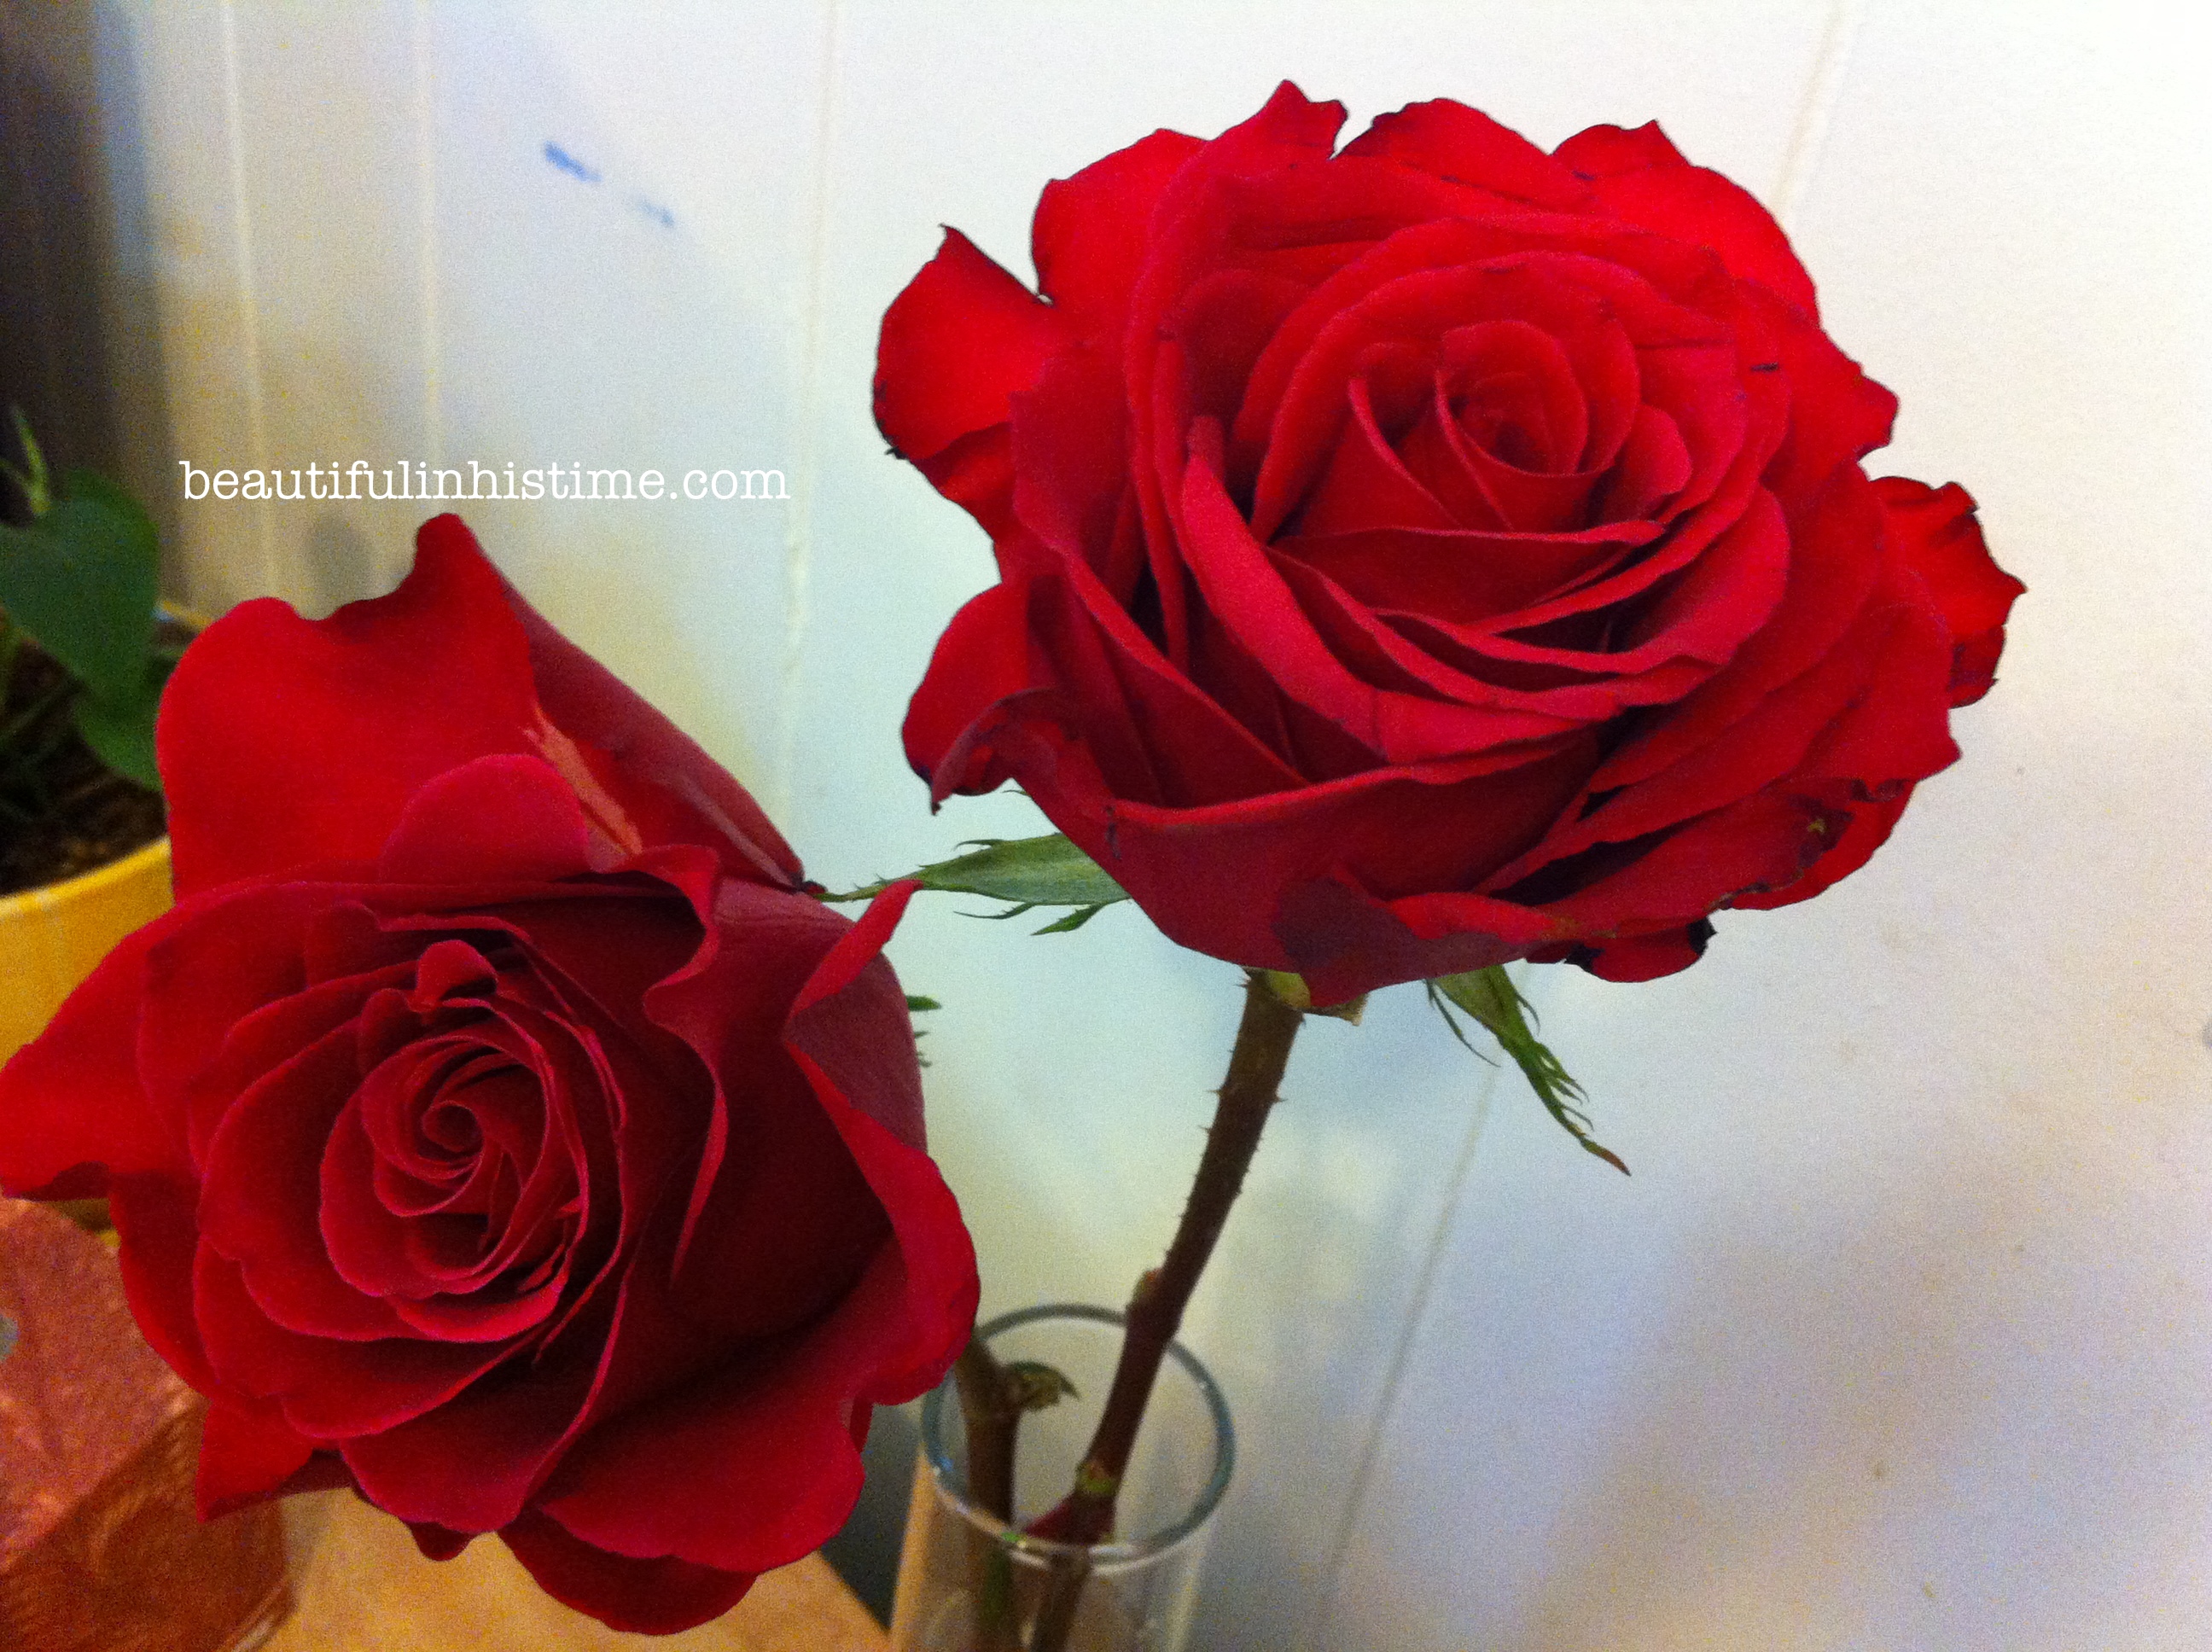 roses from friends